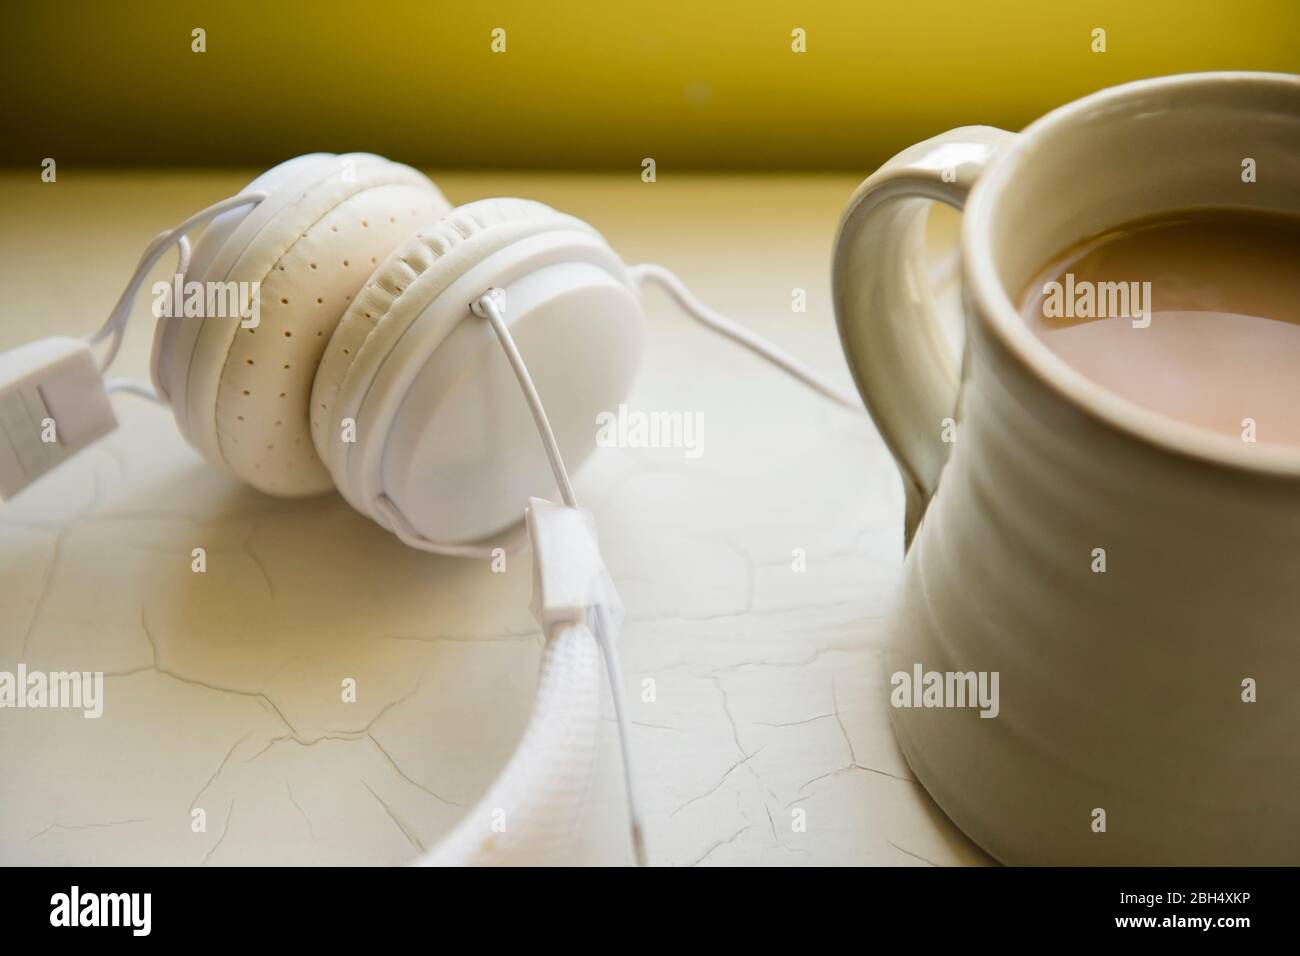 White headphones and cup of coffee Stock Photo